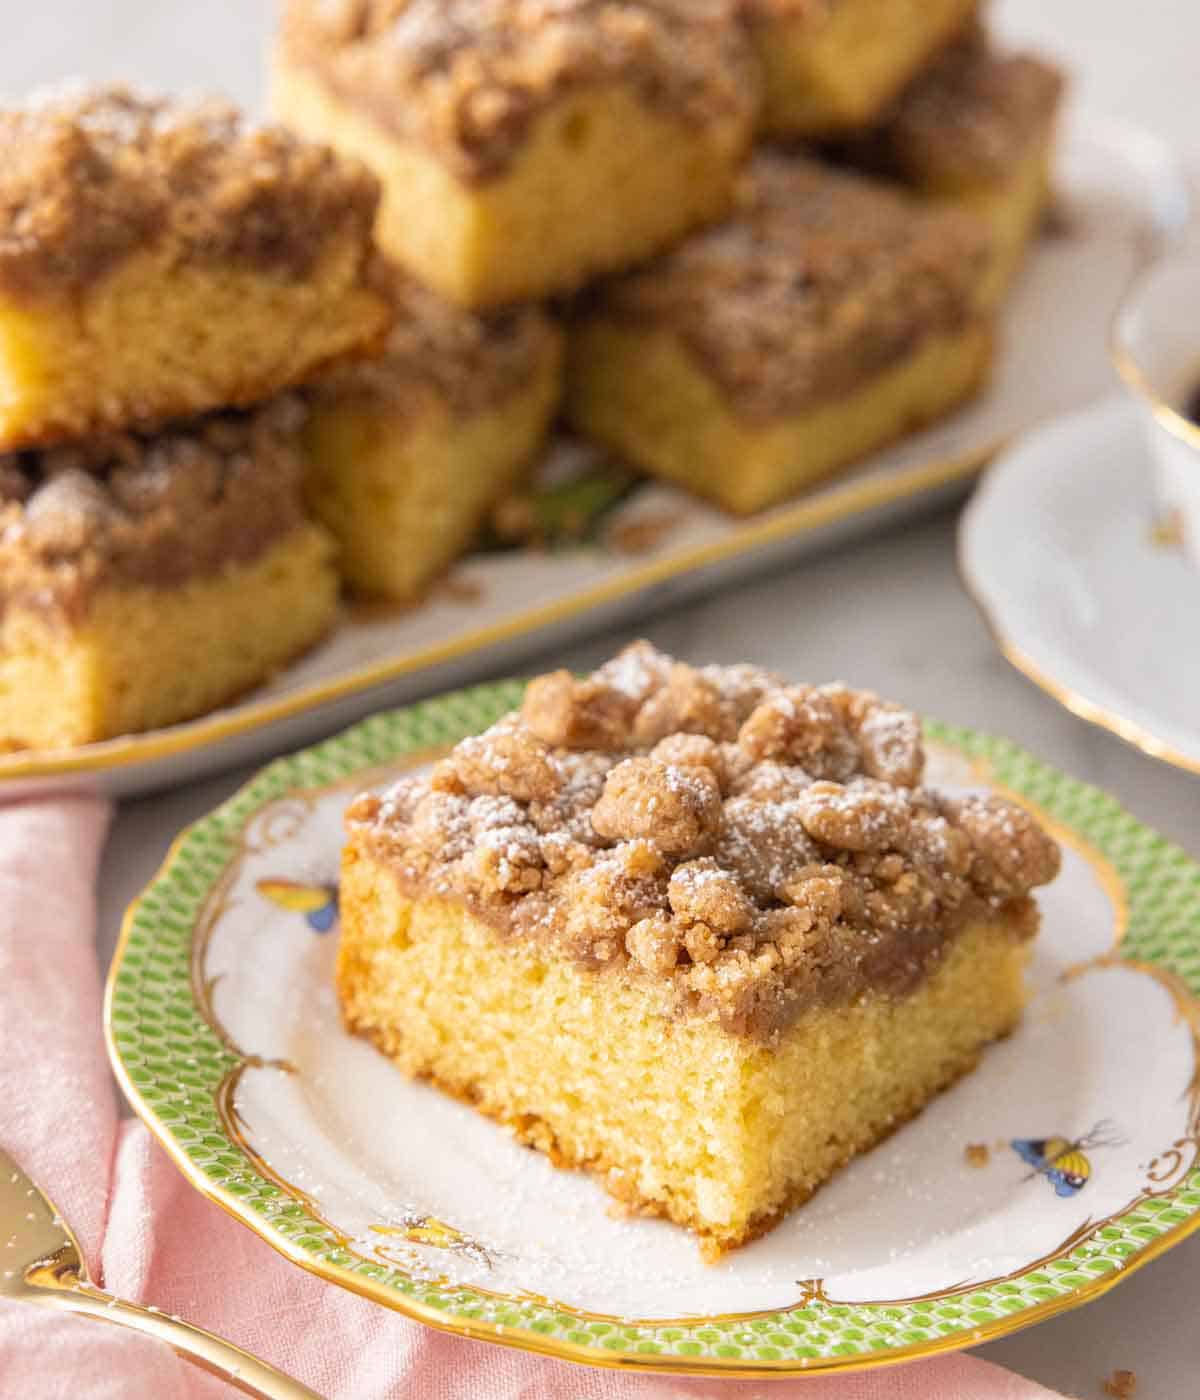 A slice of crumb cake on a plate in from of a platter of cakes.